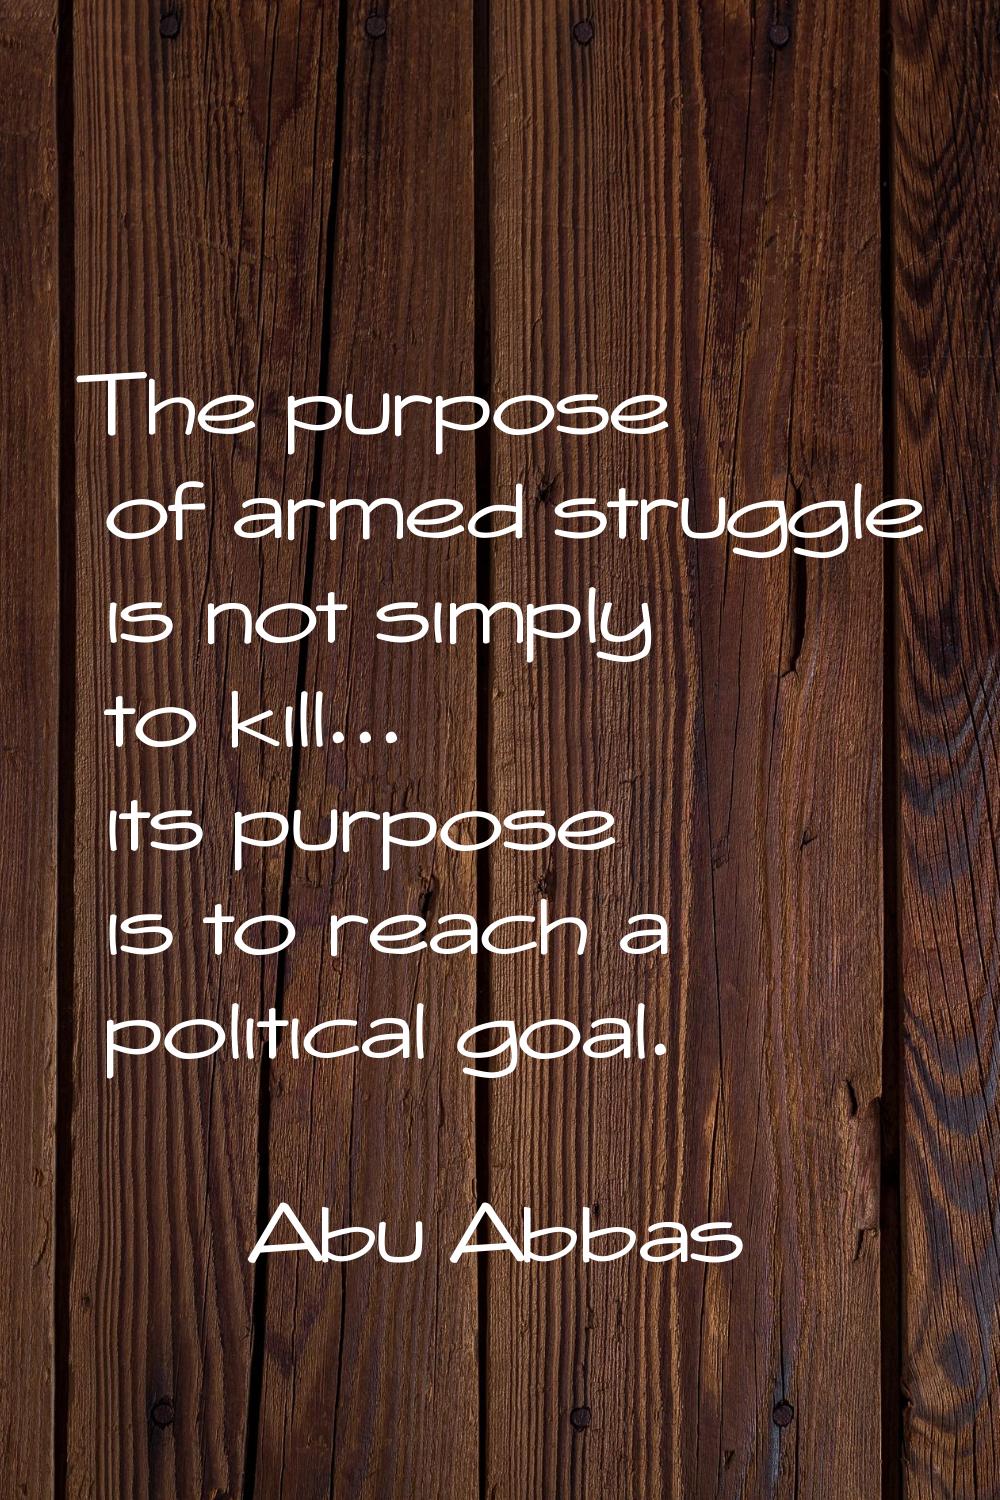 The purpose of armed struggle is not simply to kill... its purpose is to reach a political goal.